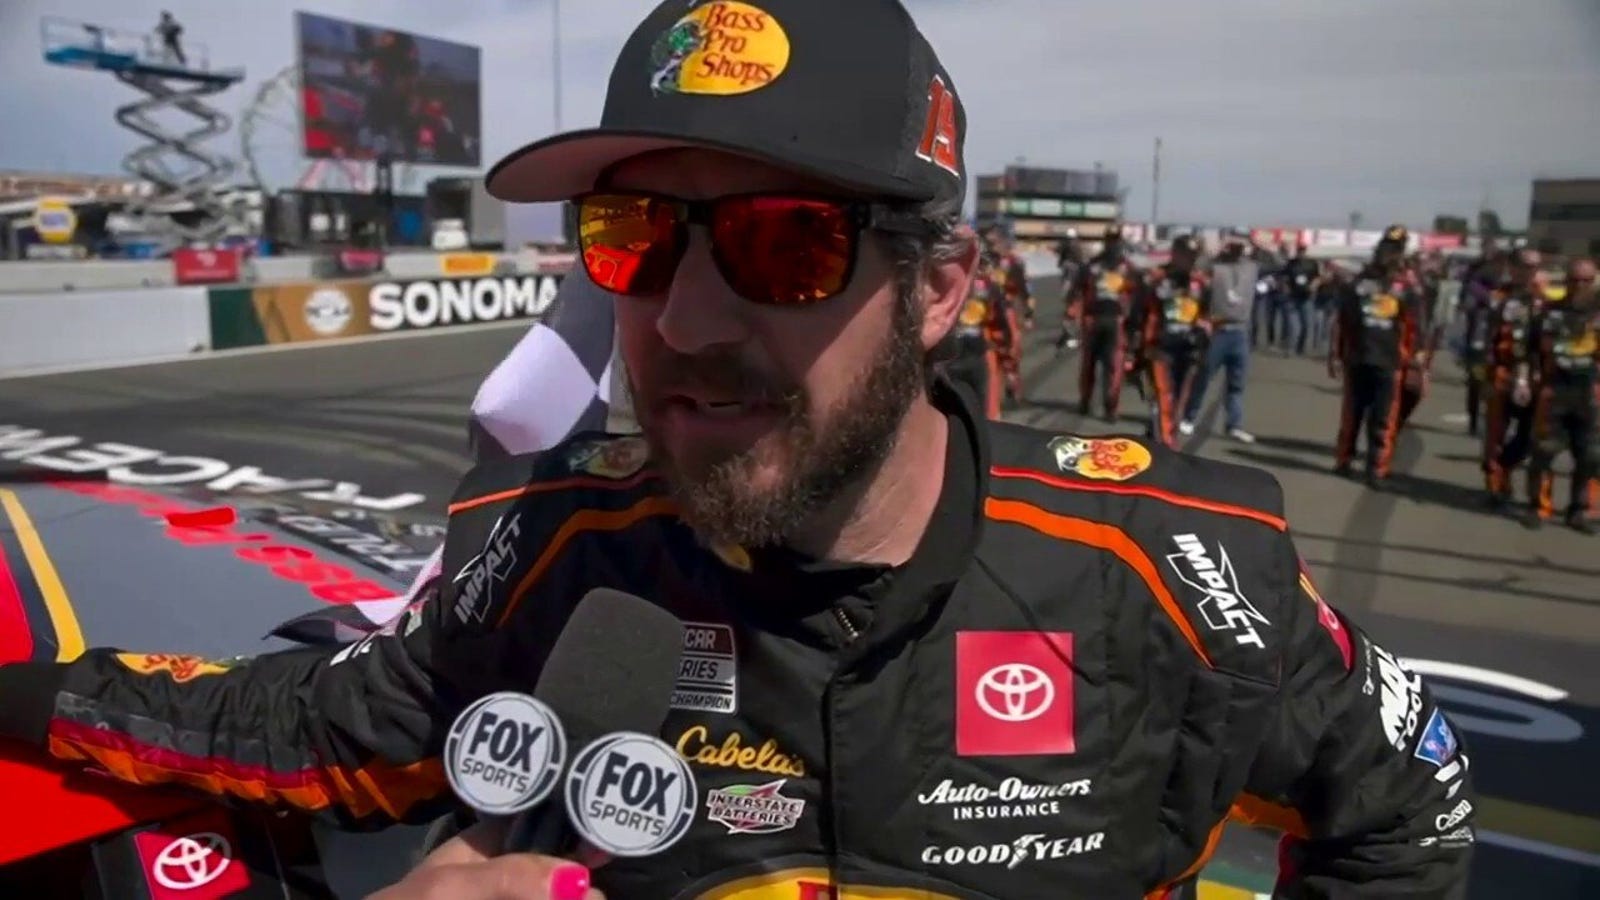 'Just feels incredible to have a day like that!' - Martin Truex Jr. 